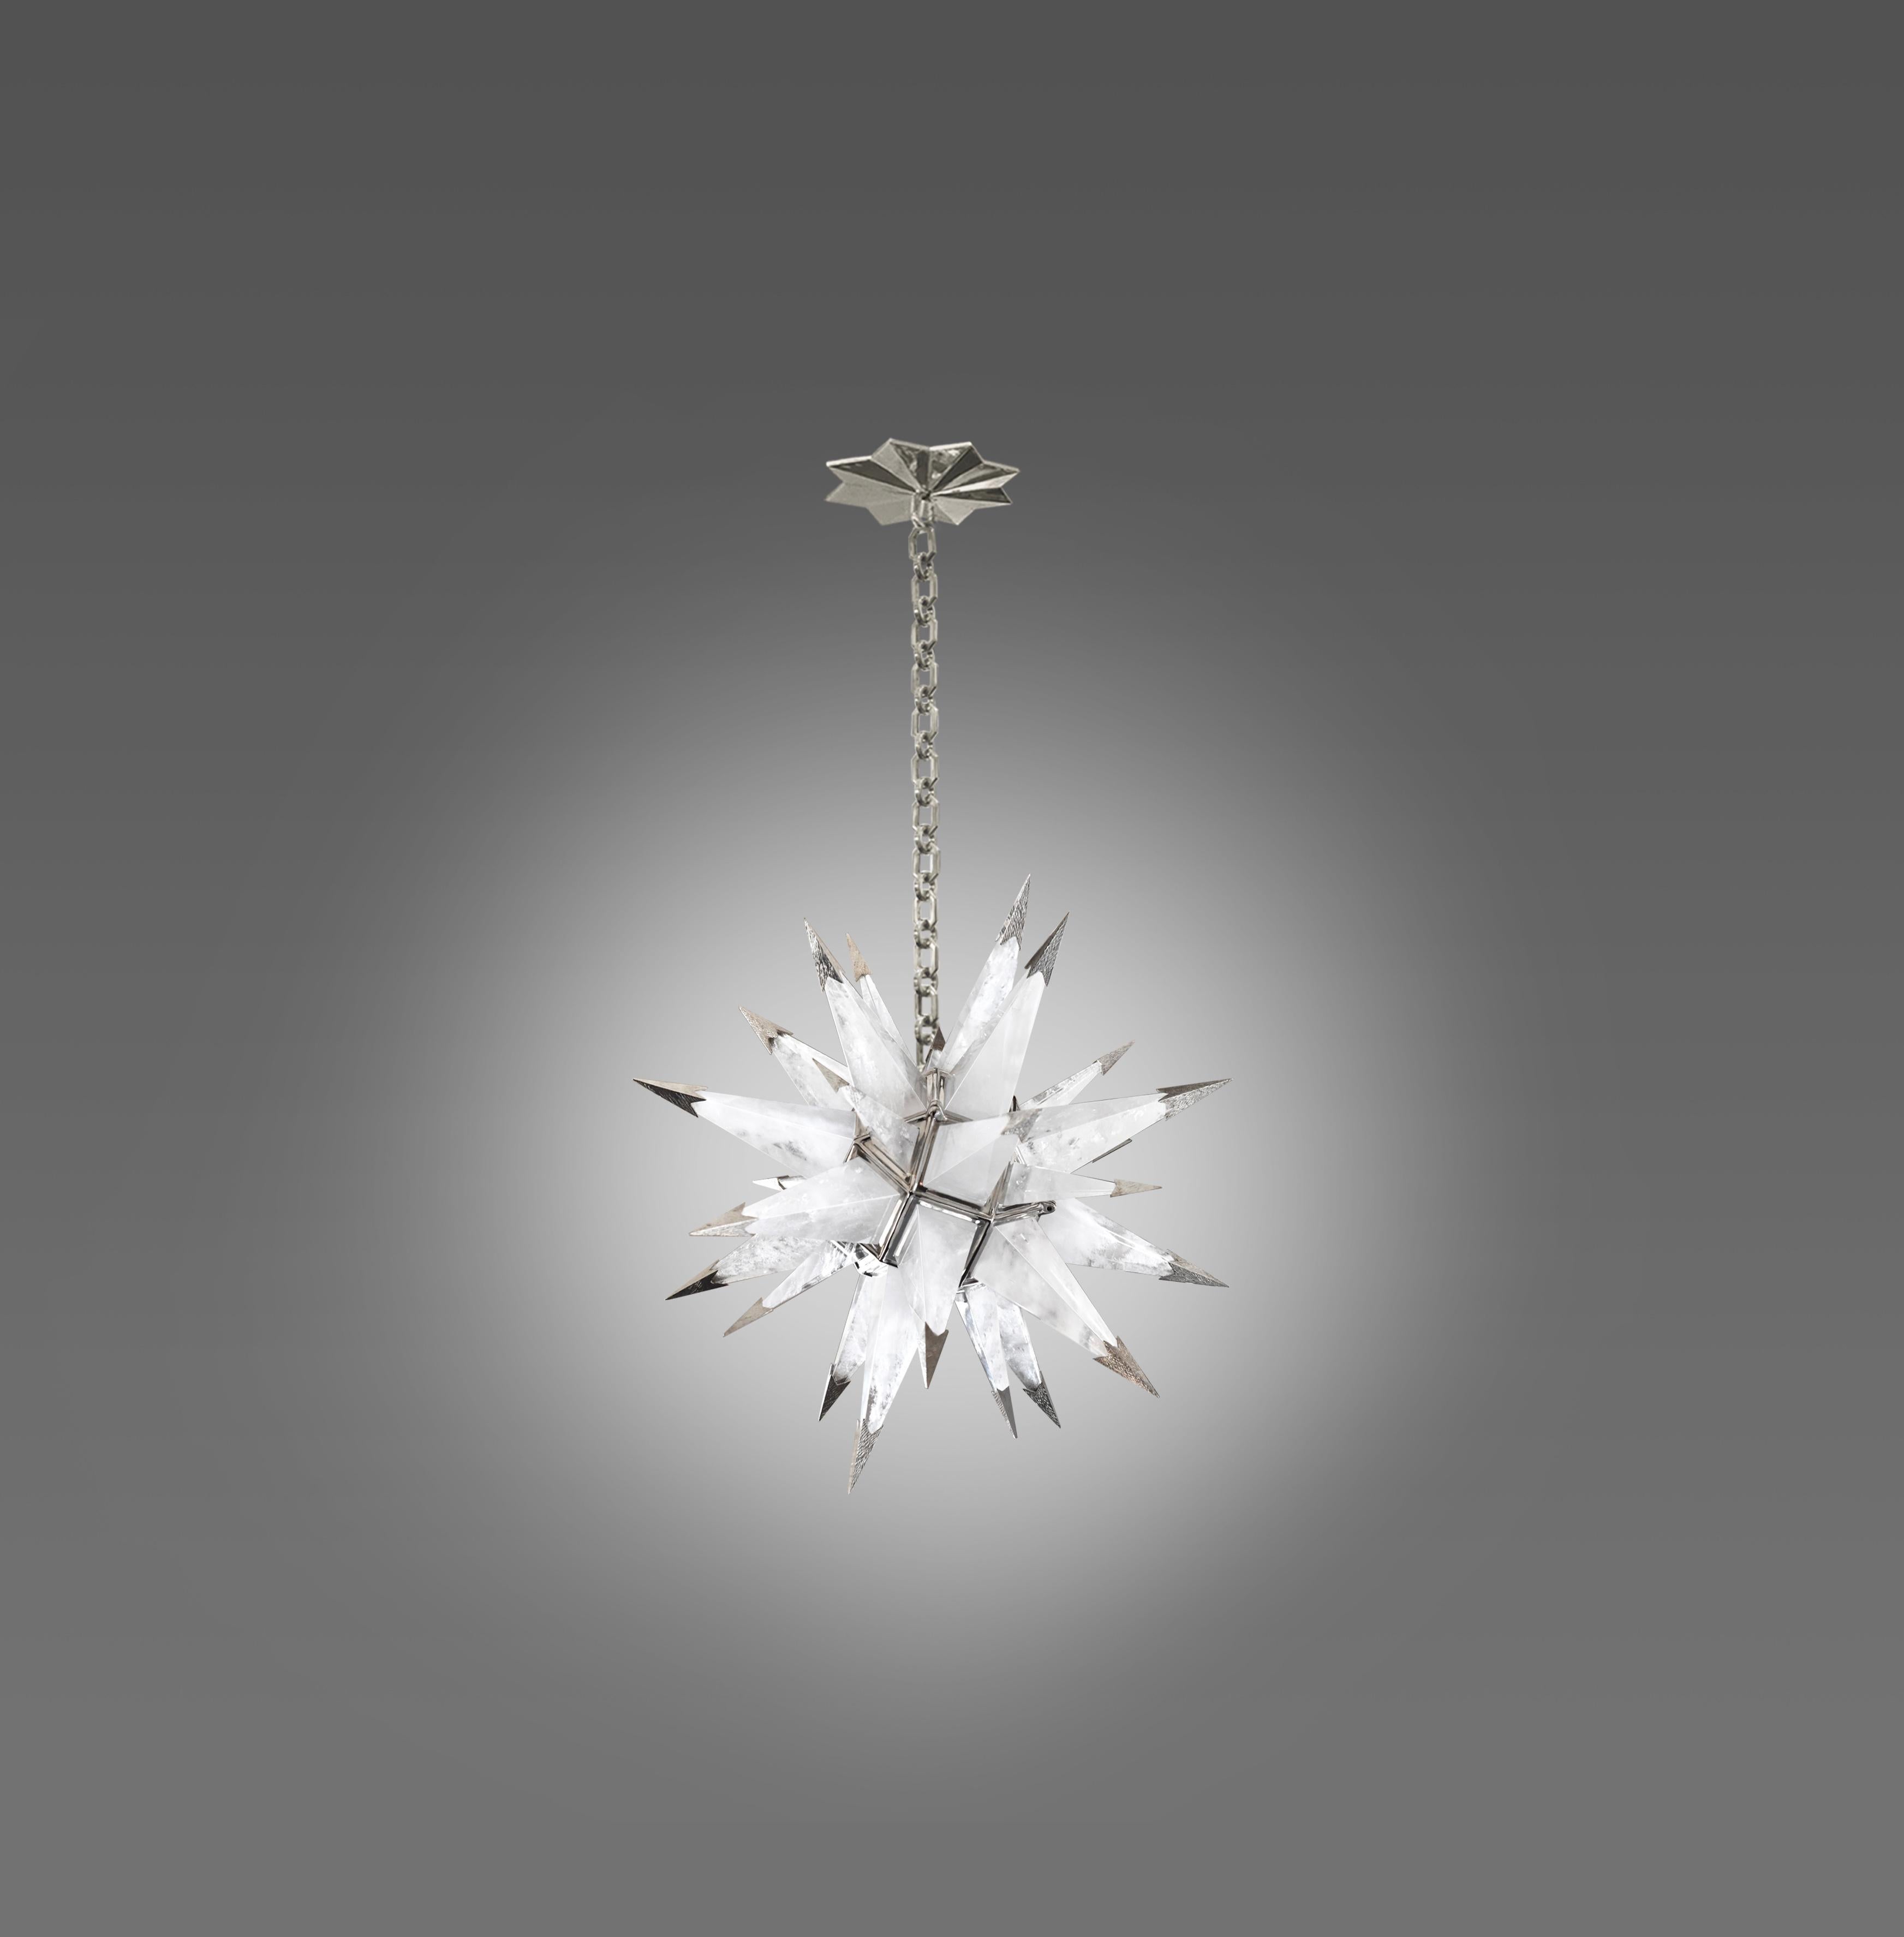 A finely carved star form rock crystal chandelier with nickel plating finishes frame and tips. Created by Phoenix Gallery, NYC.
The chandelier is 32